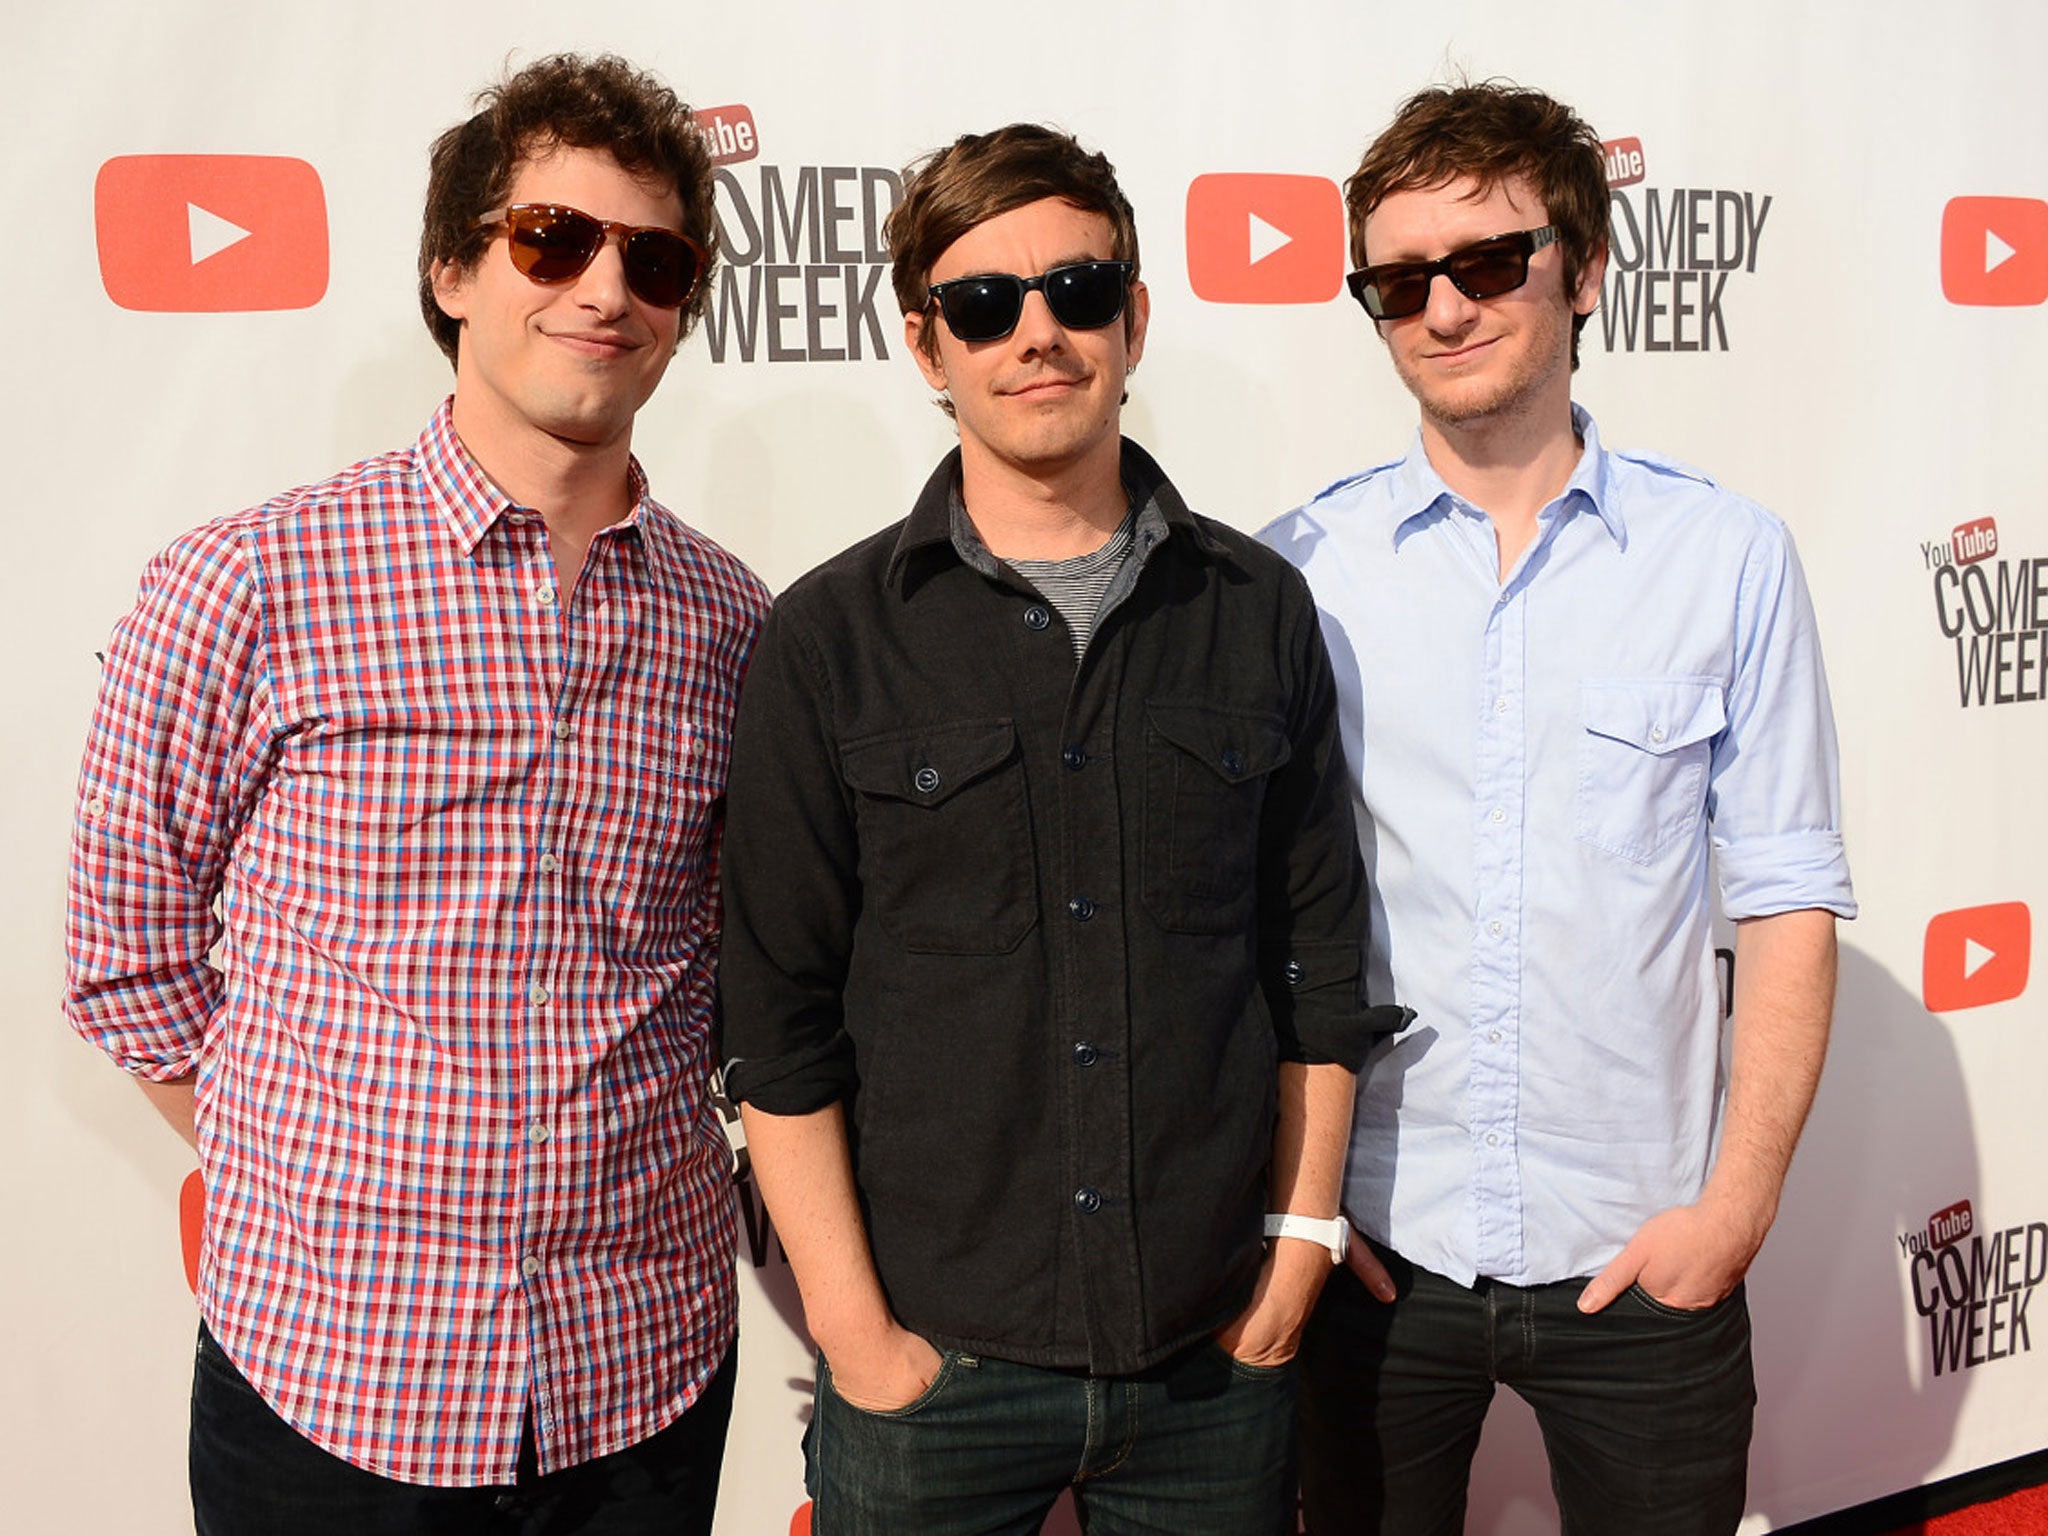 The new film will be Lonely Island's second Hollywood venture following their 2007 film Hot Rod